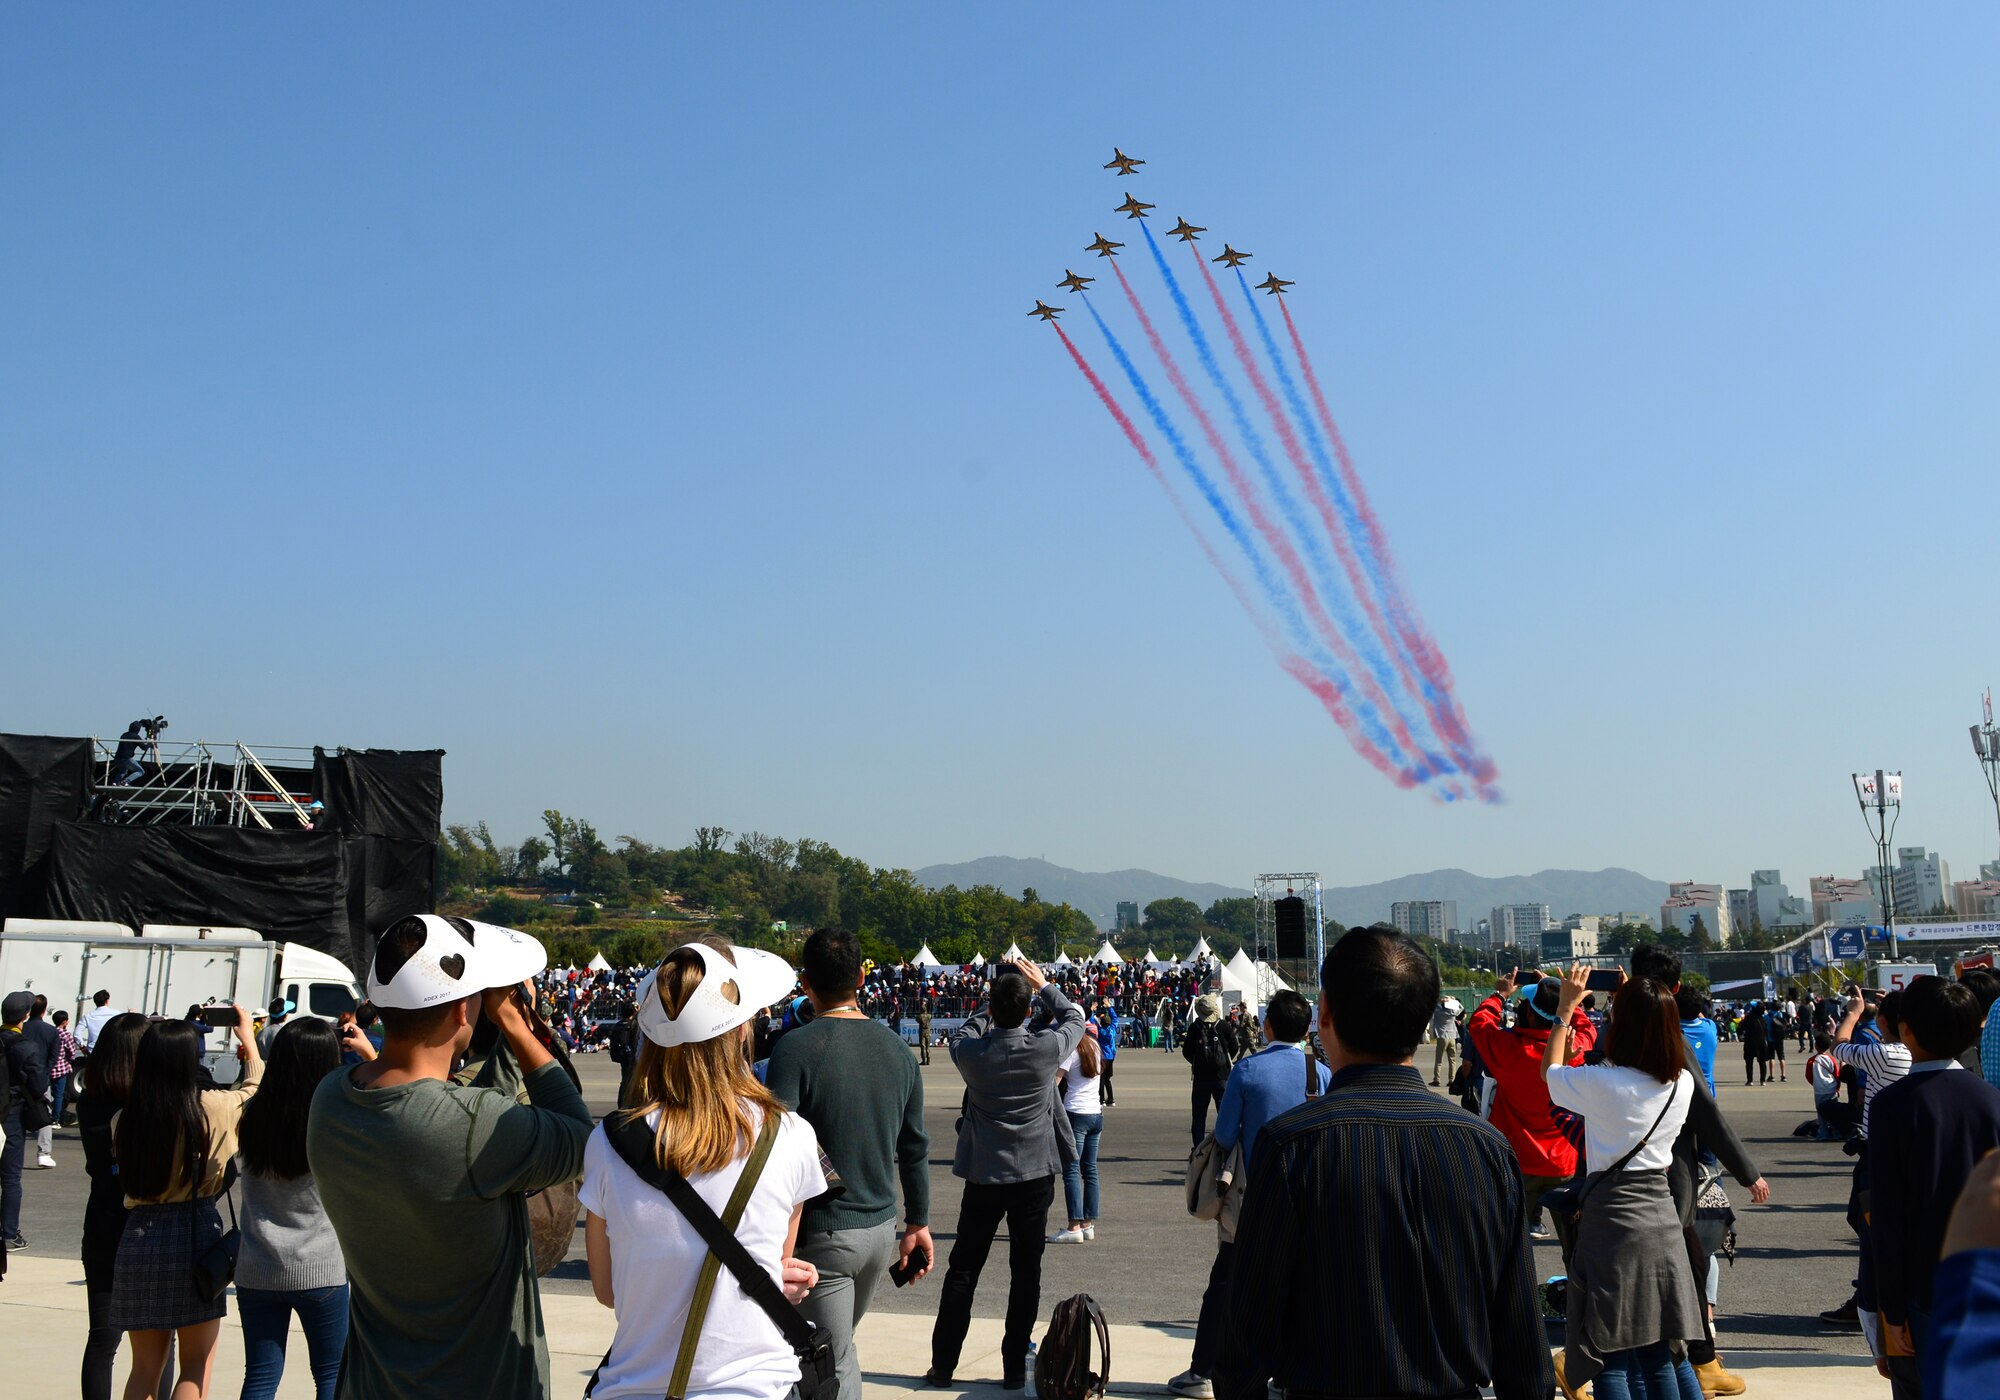 The Republic of Korea air force Aerobatic Team, Black Eagles, perform during the Seoul International Aerospace and Defense Exhibition (ADEX) 2017 at Seoul Air Base, Republic of Korea, Oct. 21, 2017. The Seoul ADEX is the largest, most comprehensive event of its kind in Northeast Asia, attracting aviation and aerospace professionals, key defense personnel, aviation enthusiasts and the general public alike. (U.S. Air Force photo by Staff Sgt. Alex Fox Echols III)